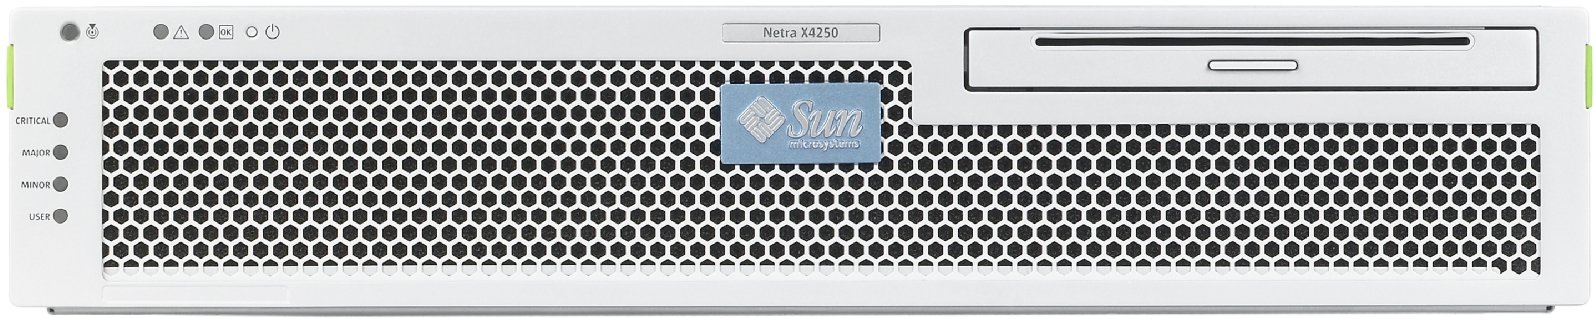 Netra X4250 Front Zoom